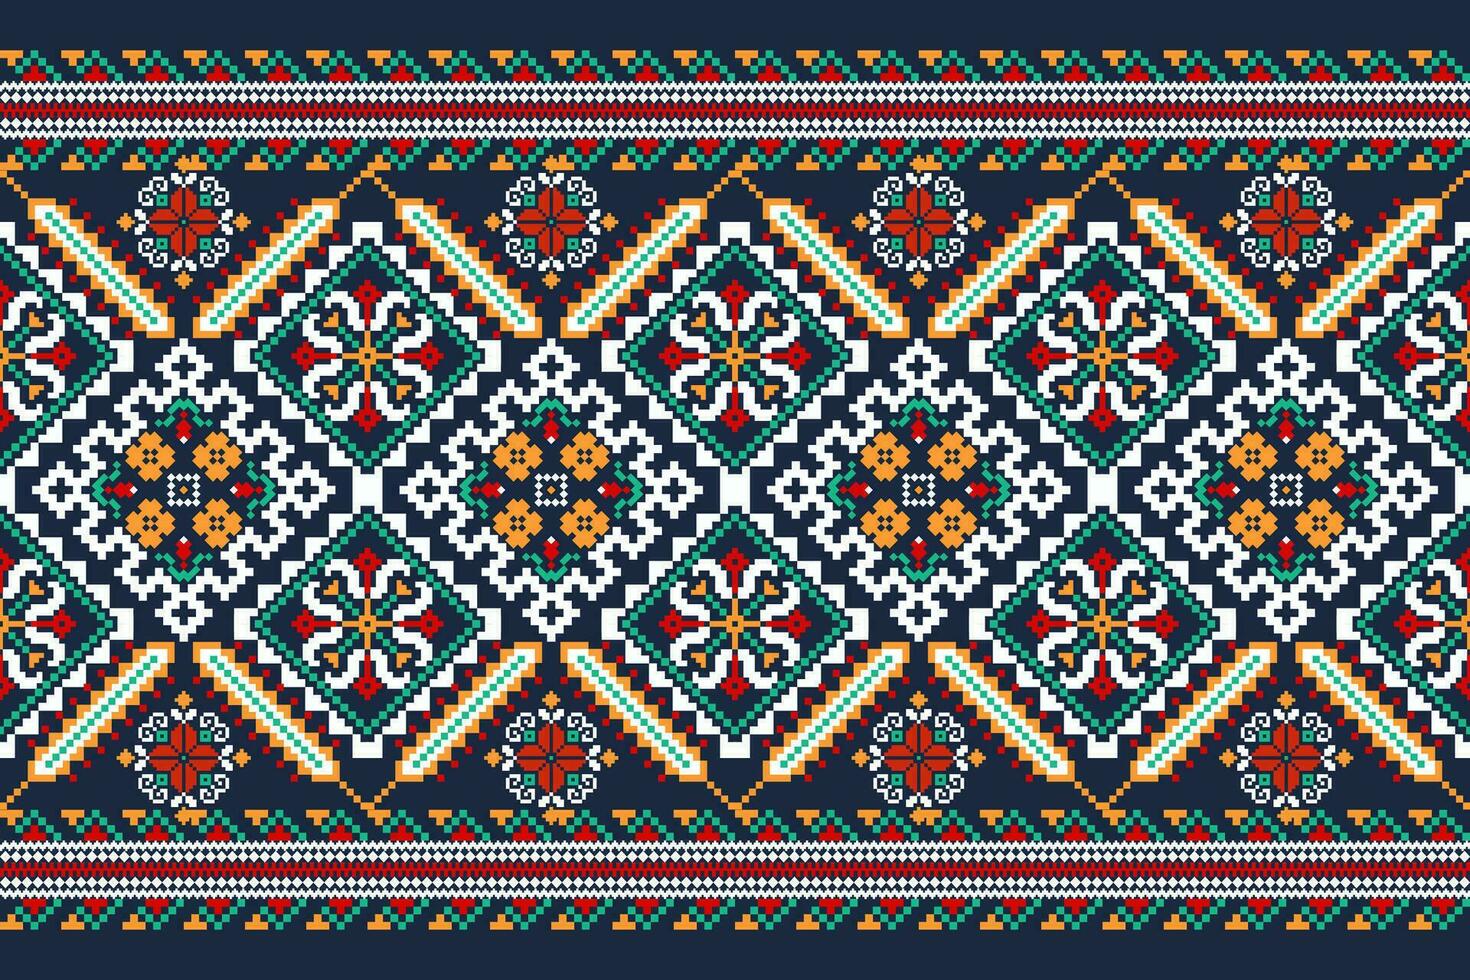 Floral Cross Stitch Embroidery on blue background.geometric ethnic oriental pattern traditional.Aztec style abstract vector illustration.design for texture,fabric,clothing,wrapping,decoration,scarf.